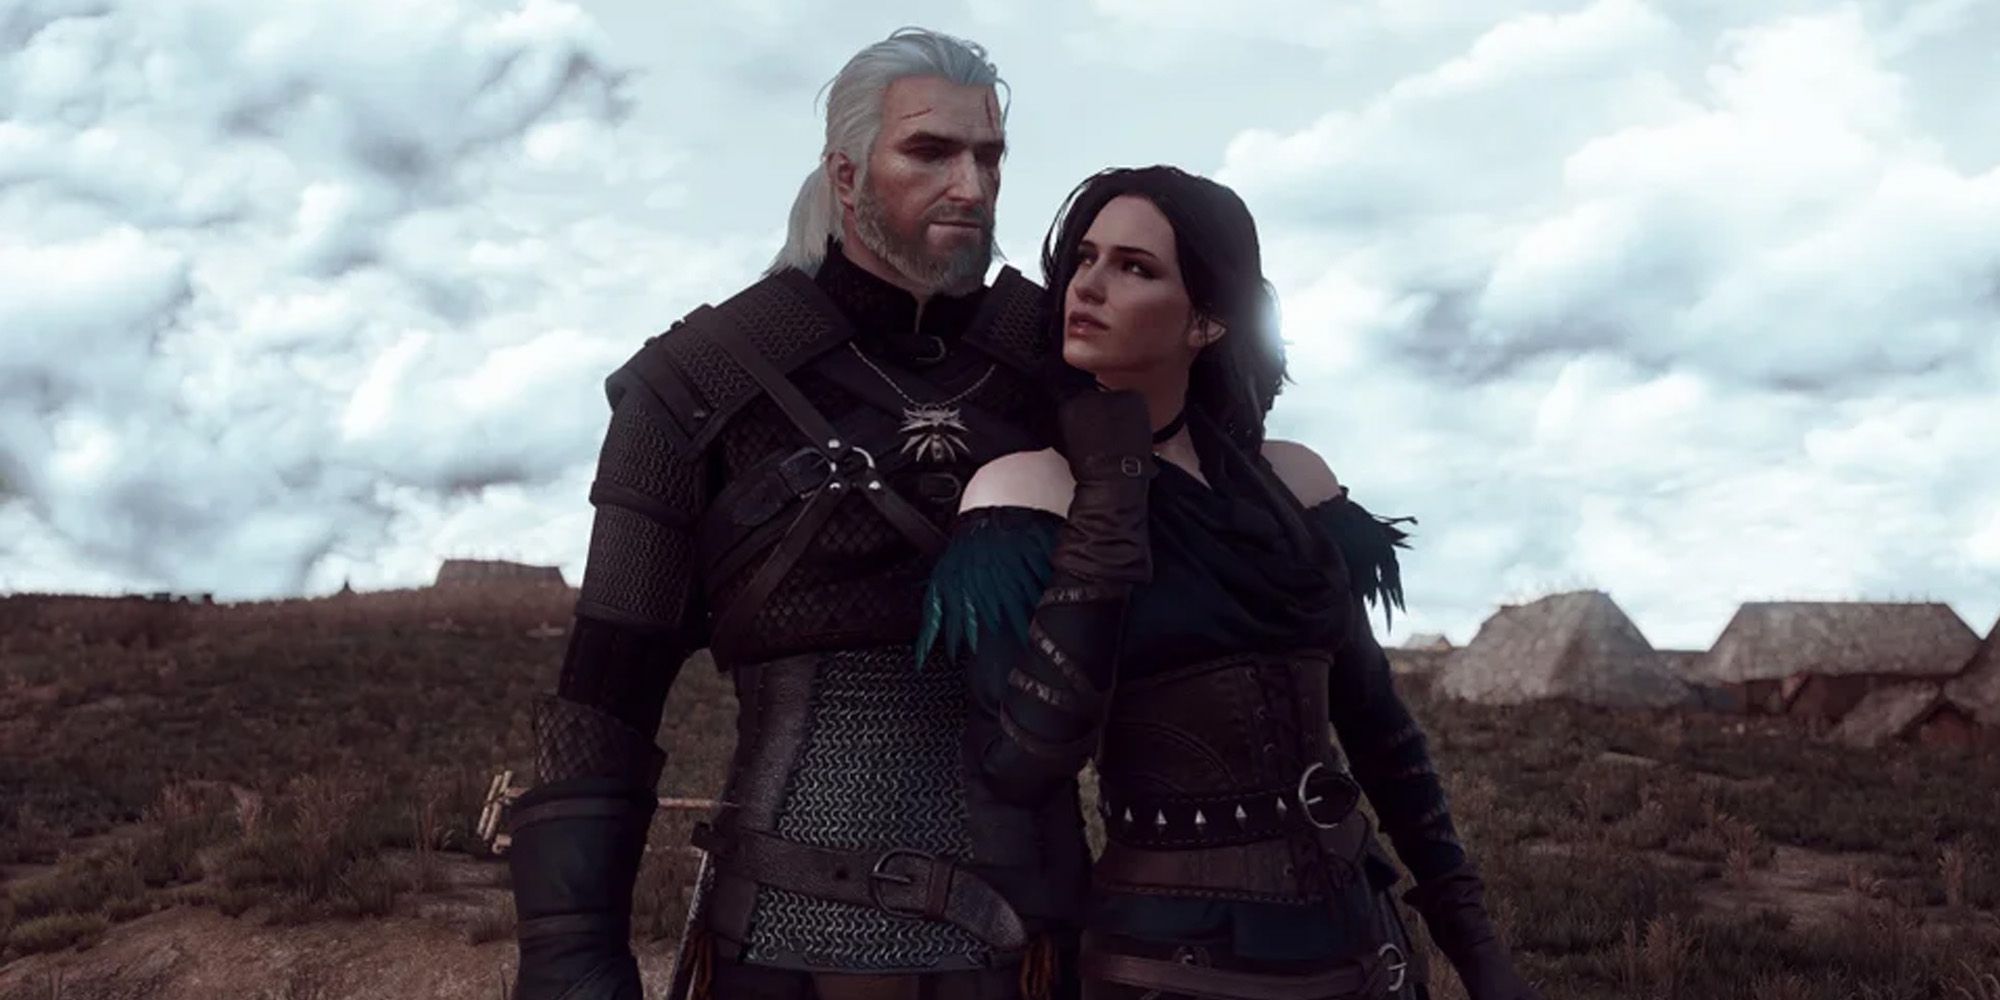 The Witcher 3: Wild Hunt, Geralt and Yennefer standing together in front of a village